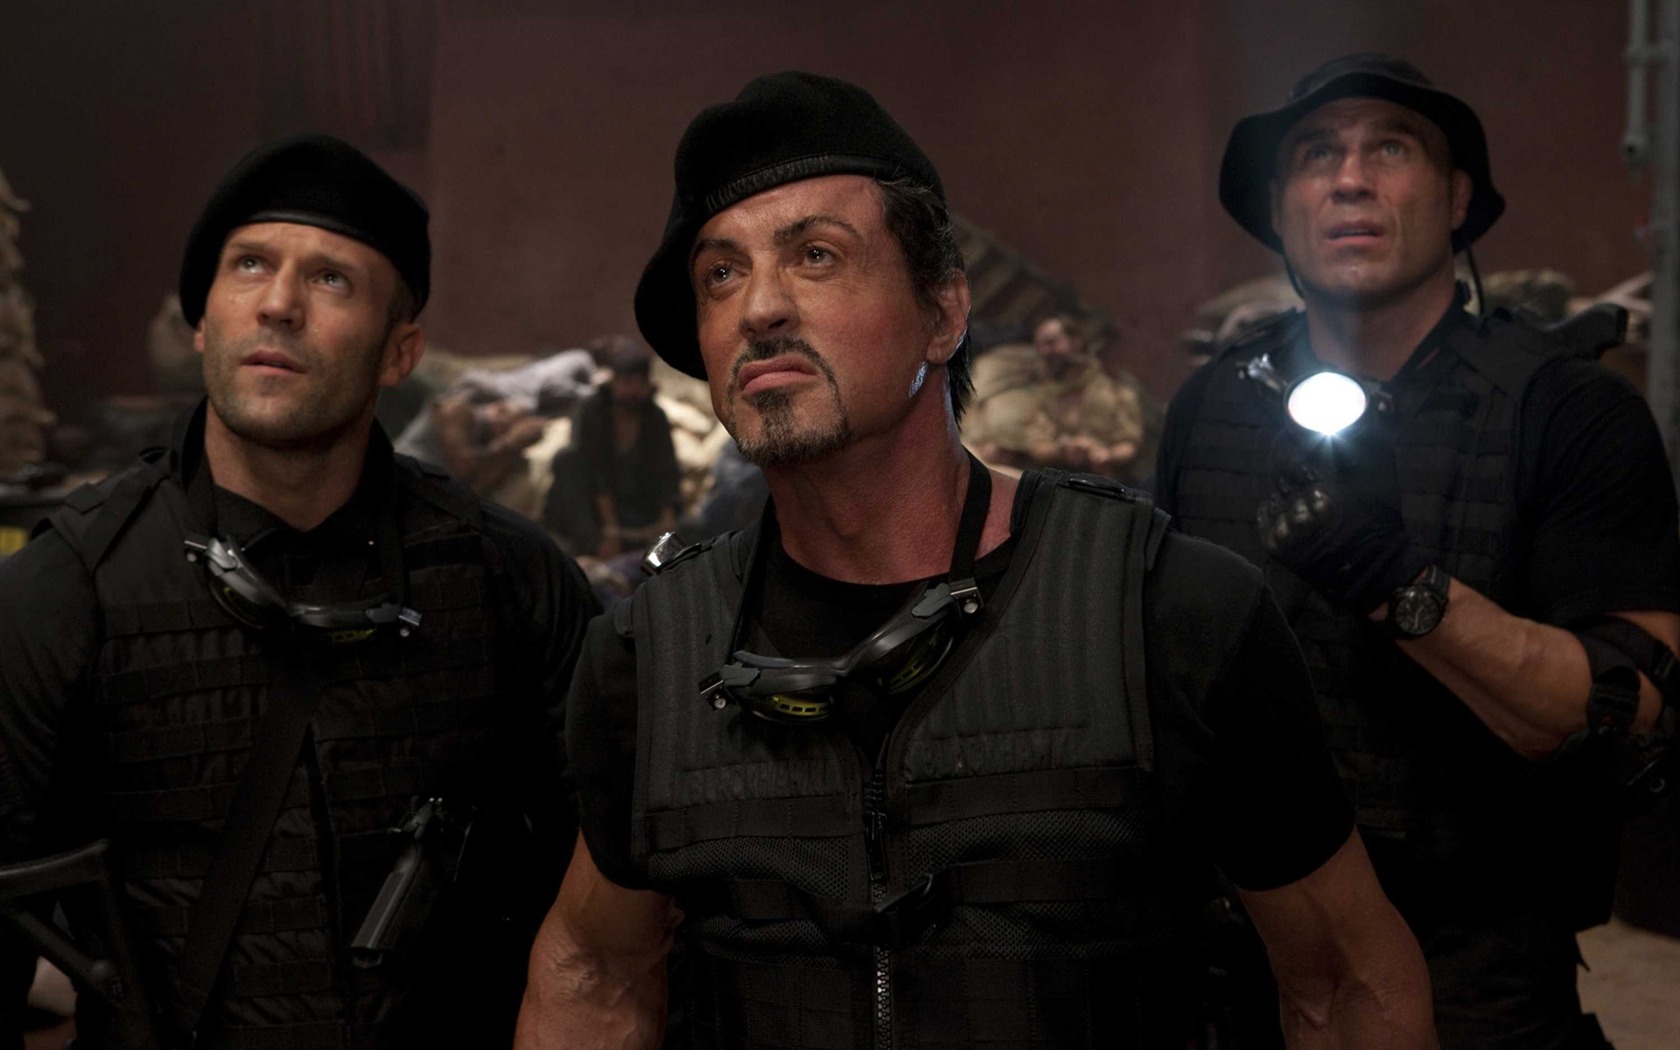 The Expendables HD Wallpaper #5 - 1680x1050